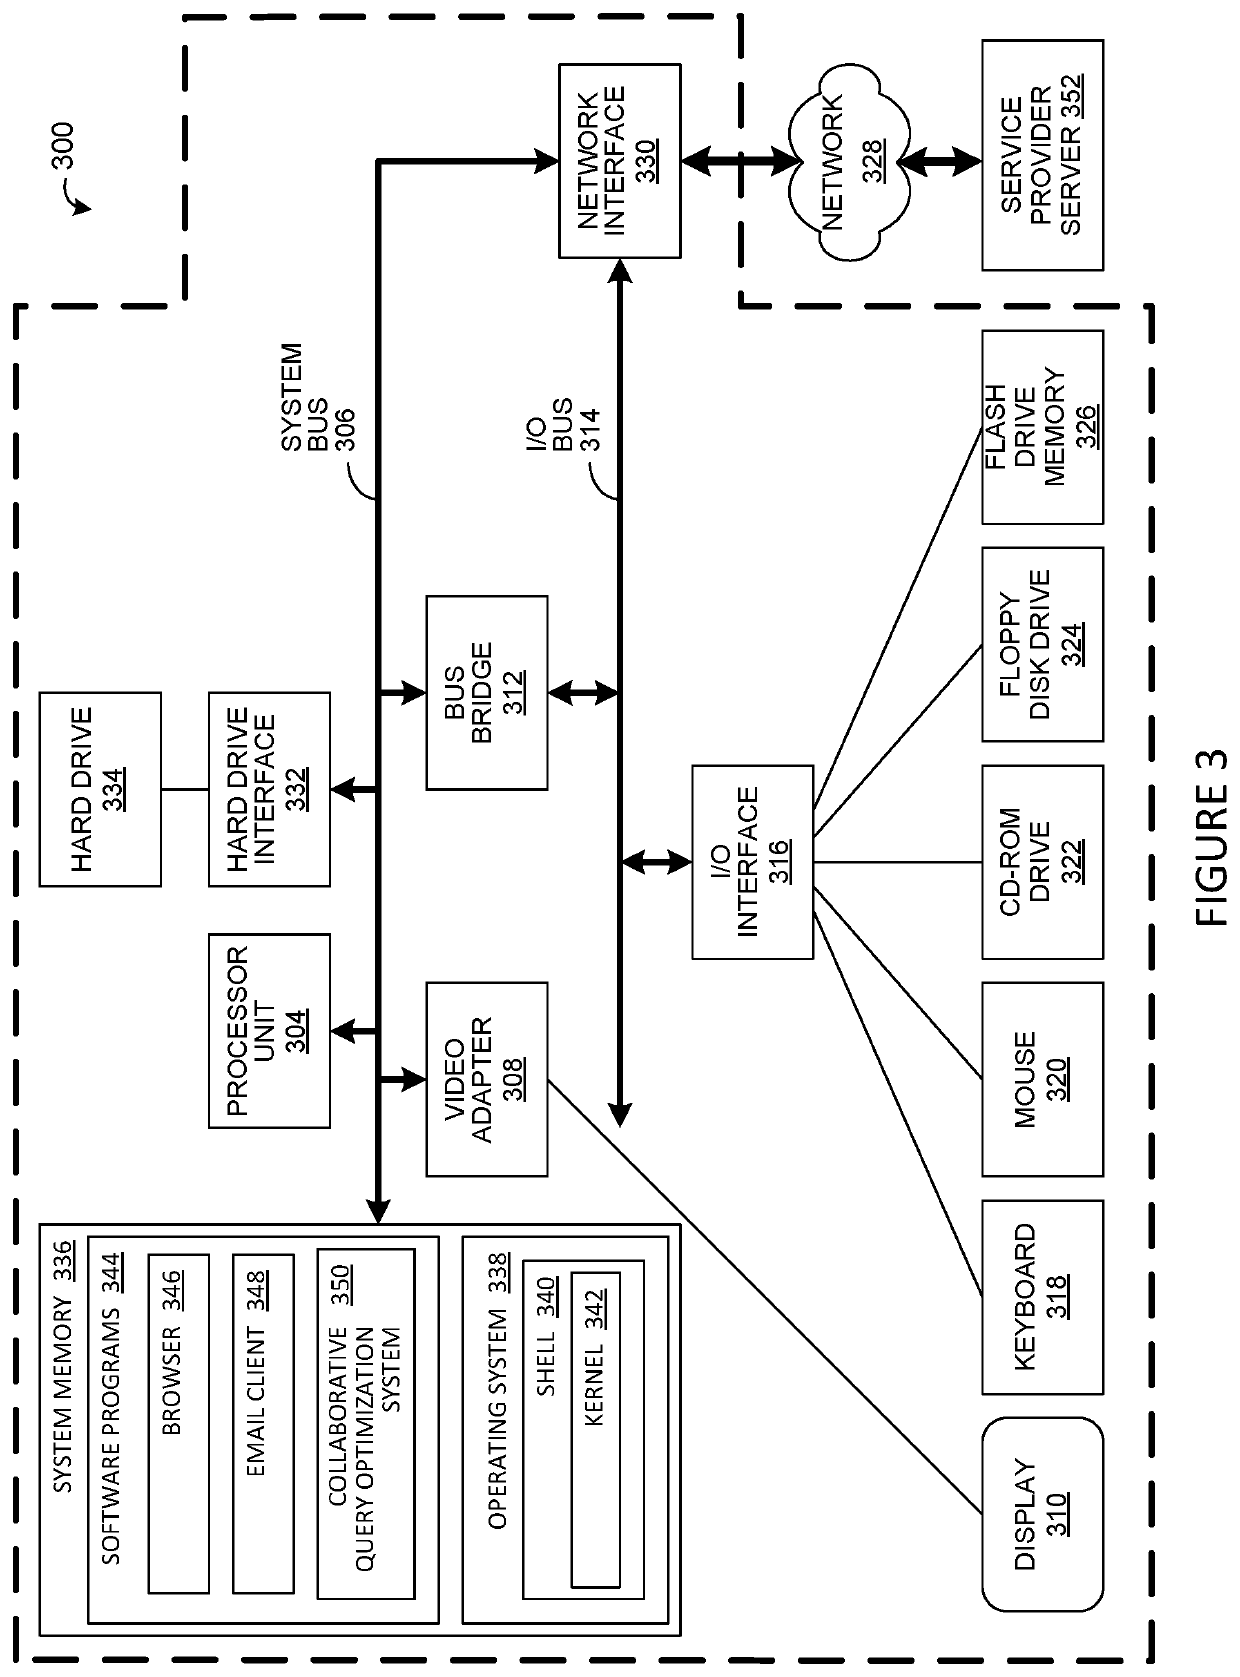 Method and system for collaborative and dynamic query optimization in a DBMS network